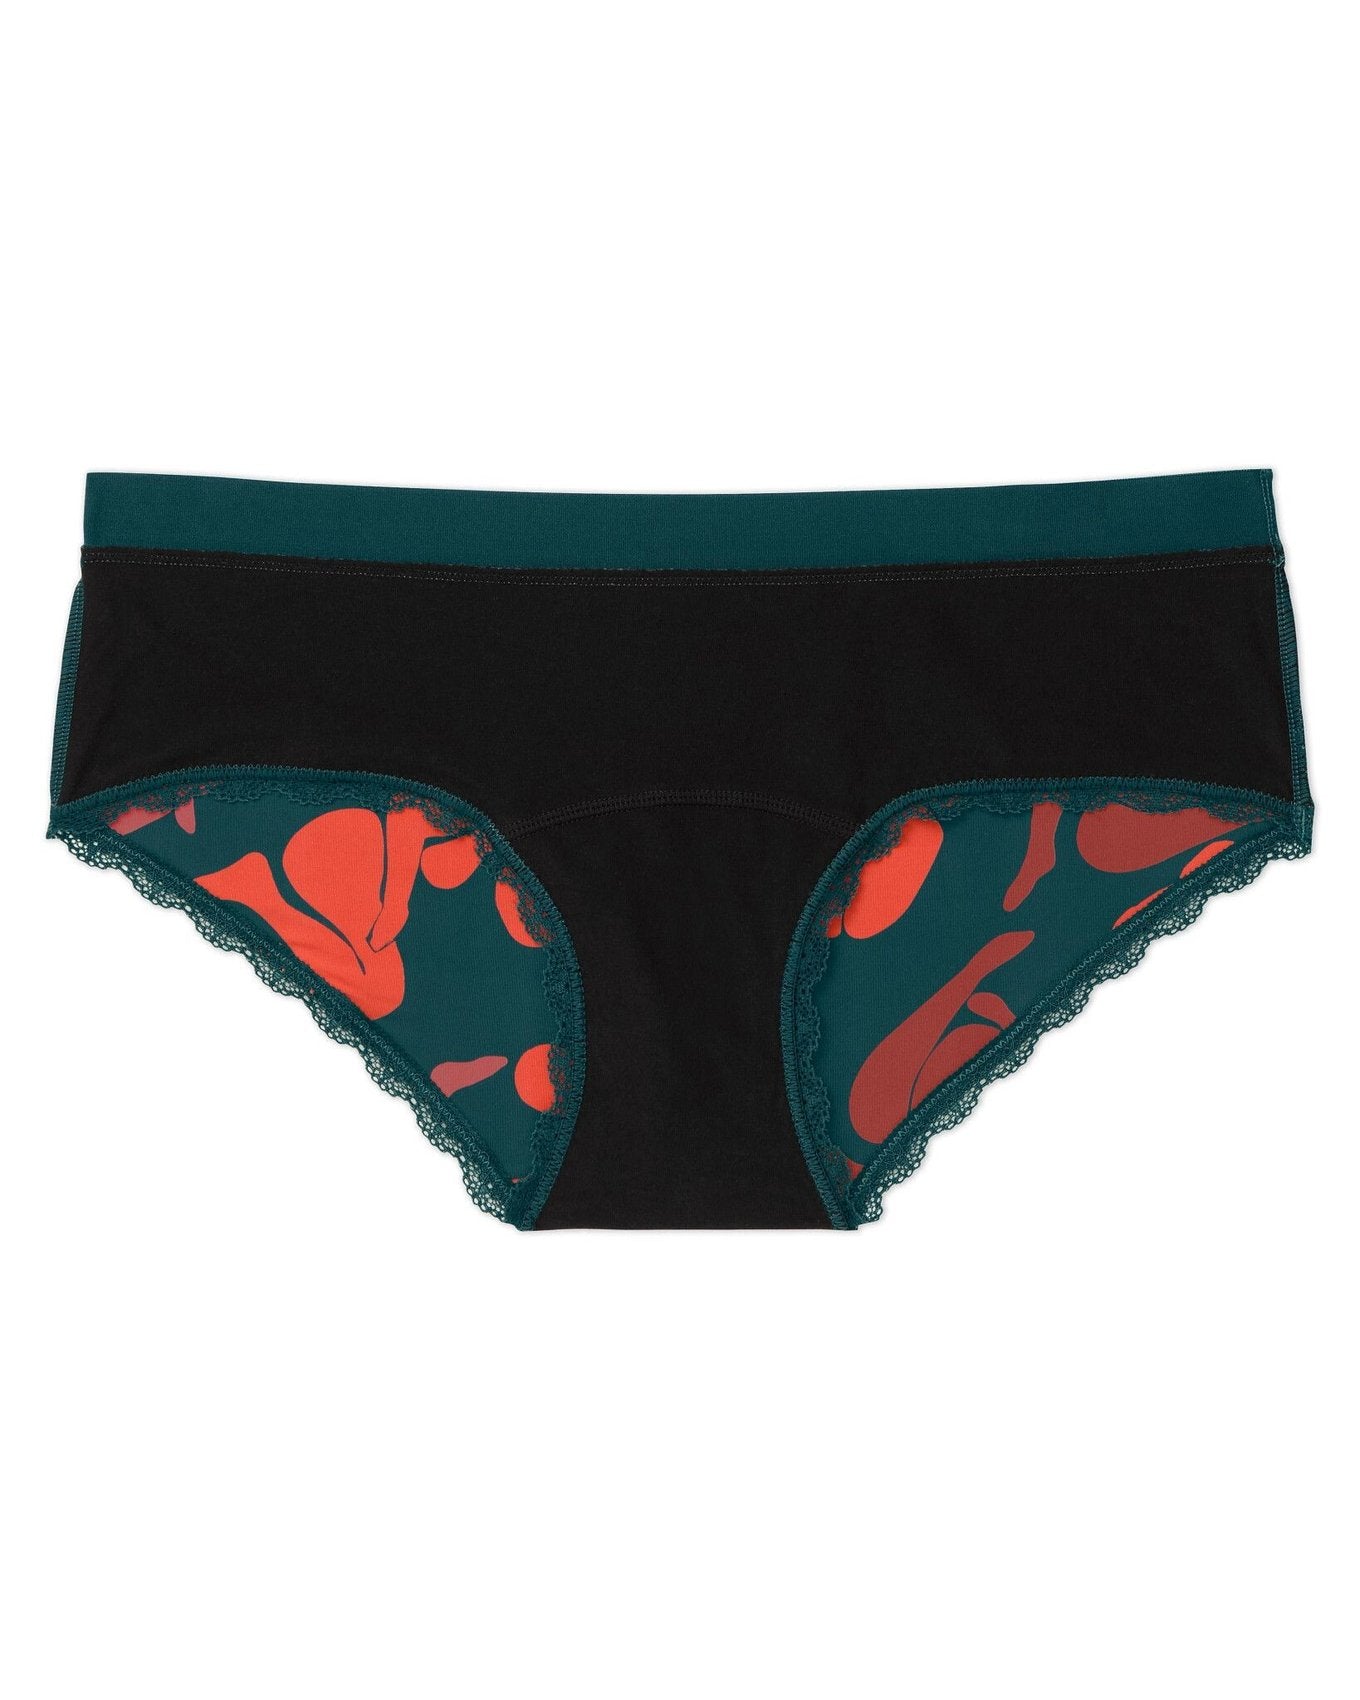 Joyja Olivia period-proof panty in color Muse C01 and shape hipster